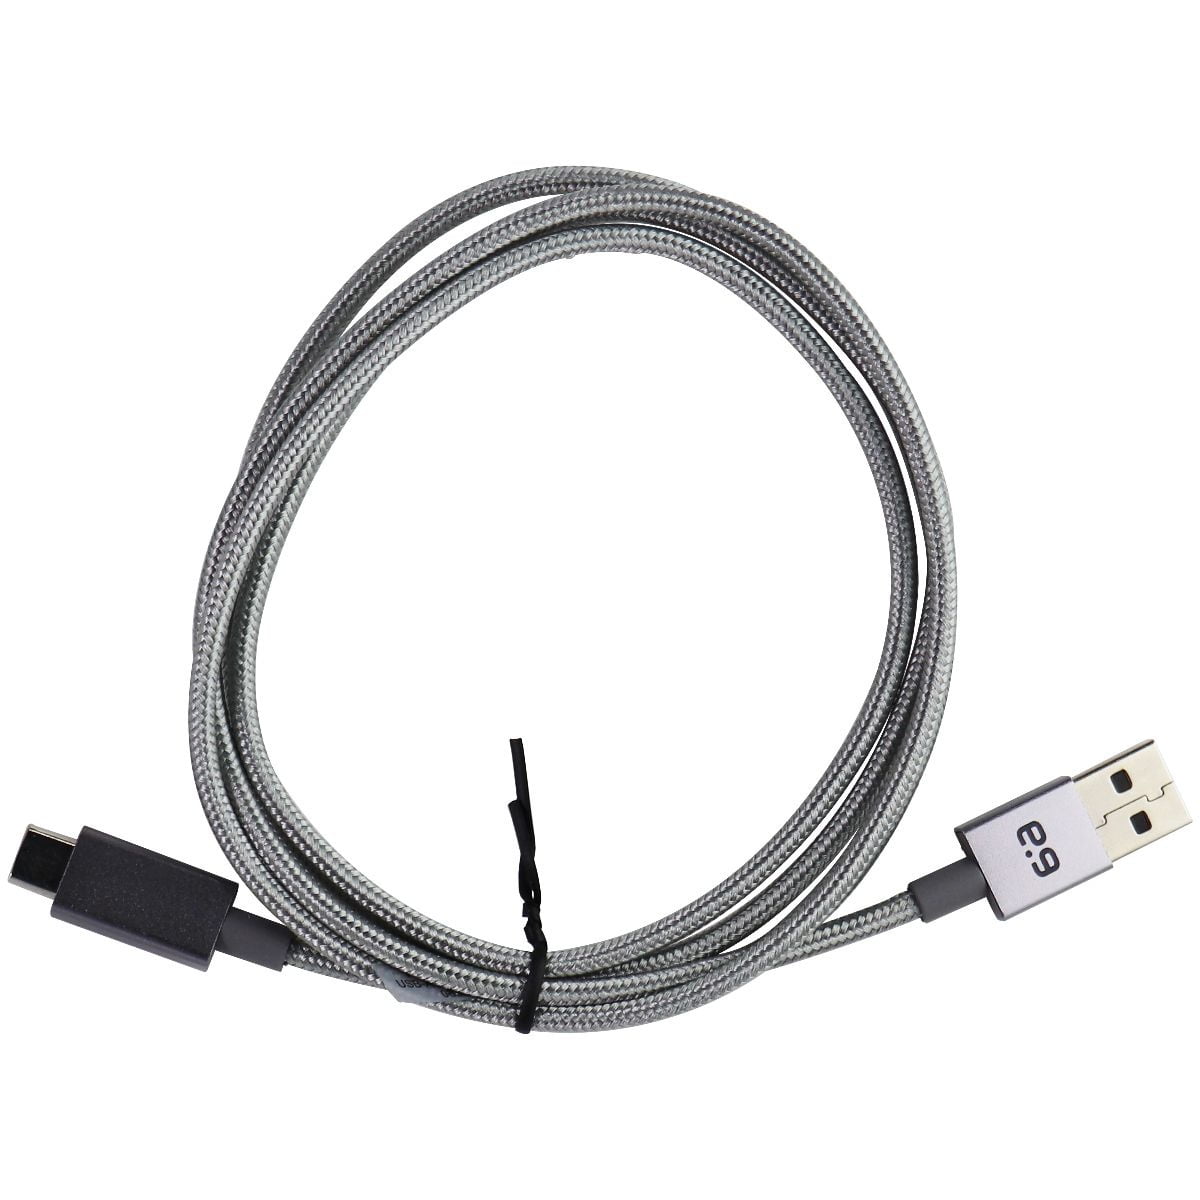 PureGear Braided Charge-Sync Cable for Micro-USB devices Metallic Silver 48 